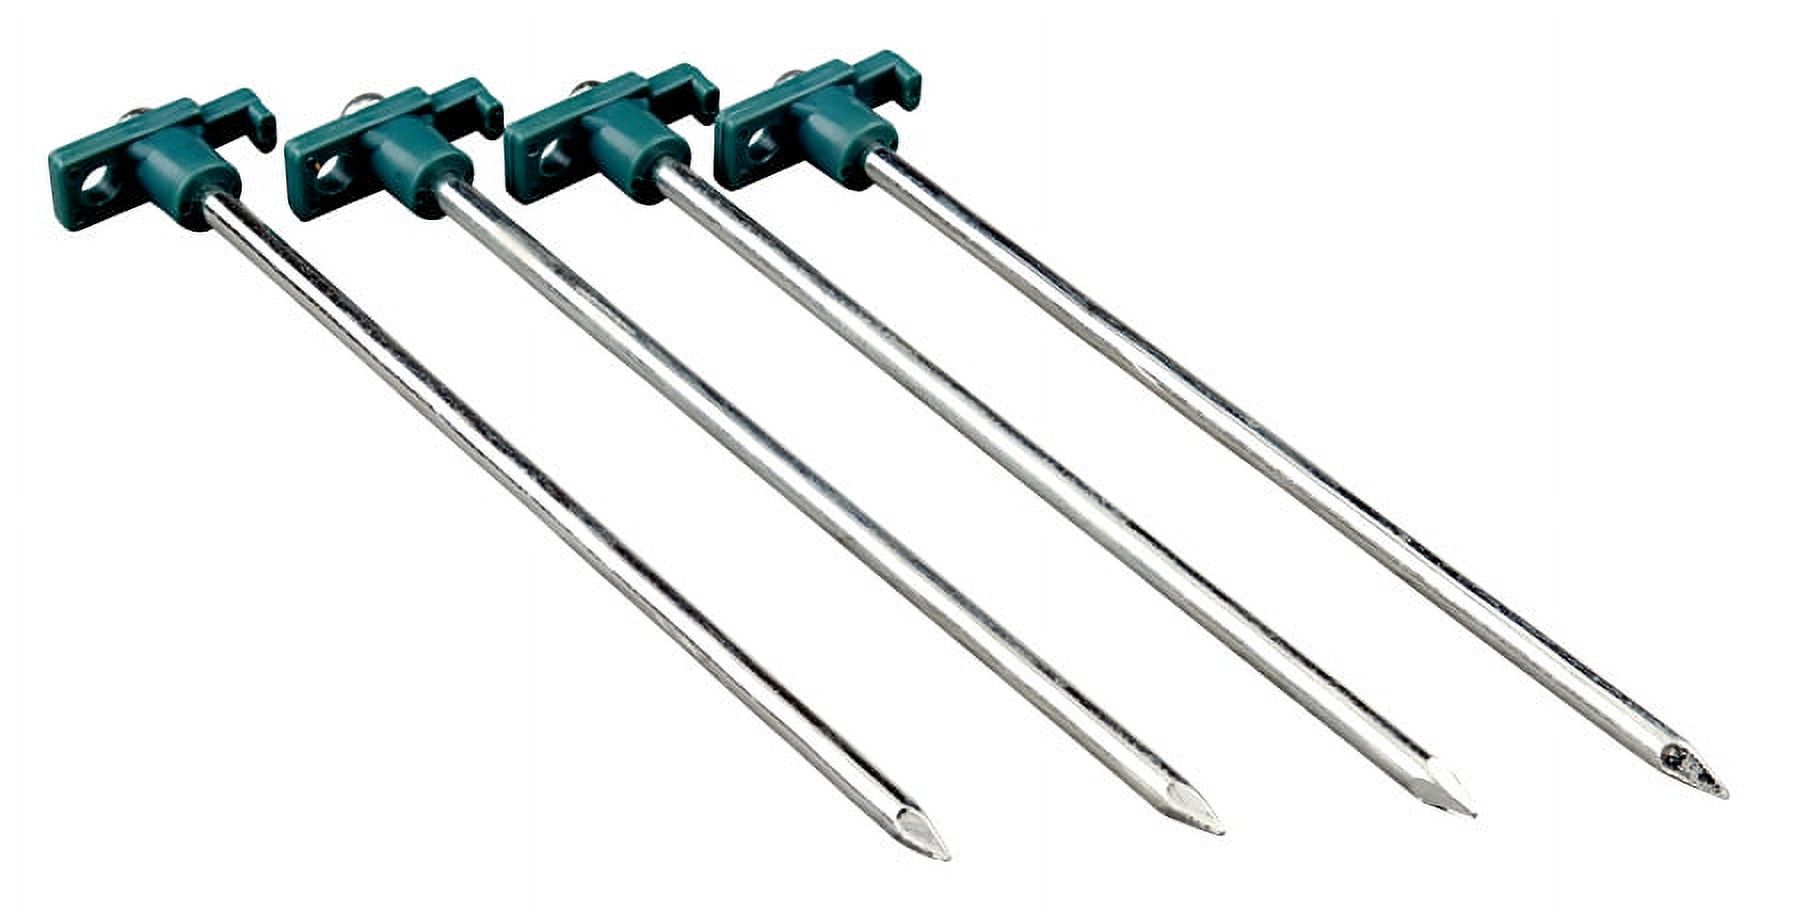 Coleman Polypropylene 10" Tent Stakes, 4 Pack, Green - image 5 of 6